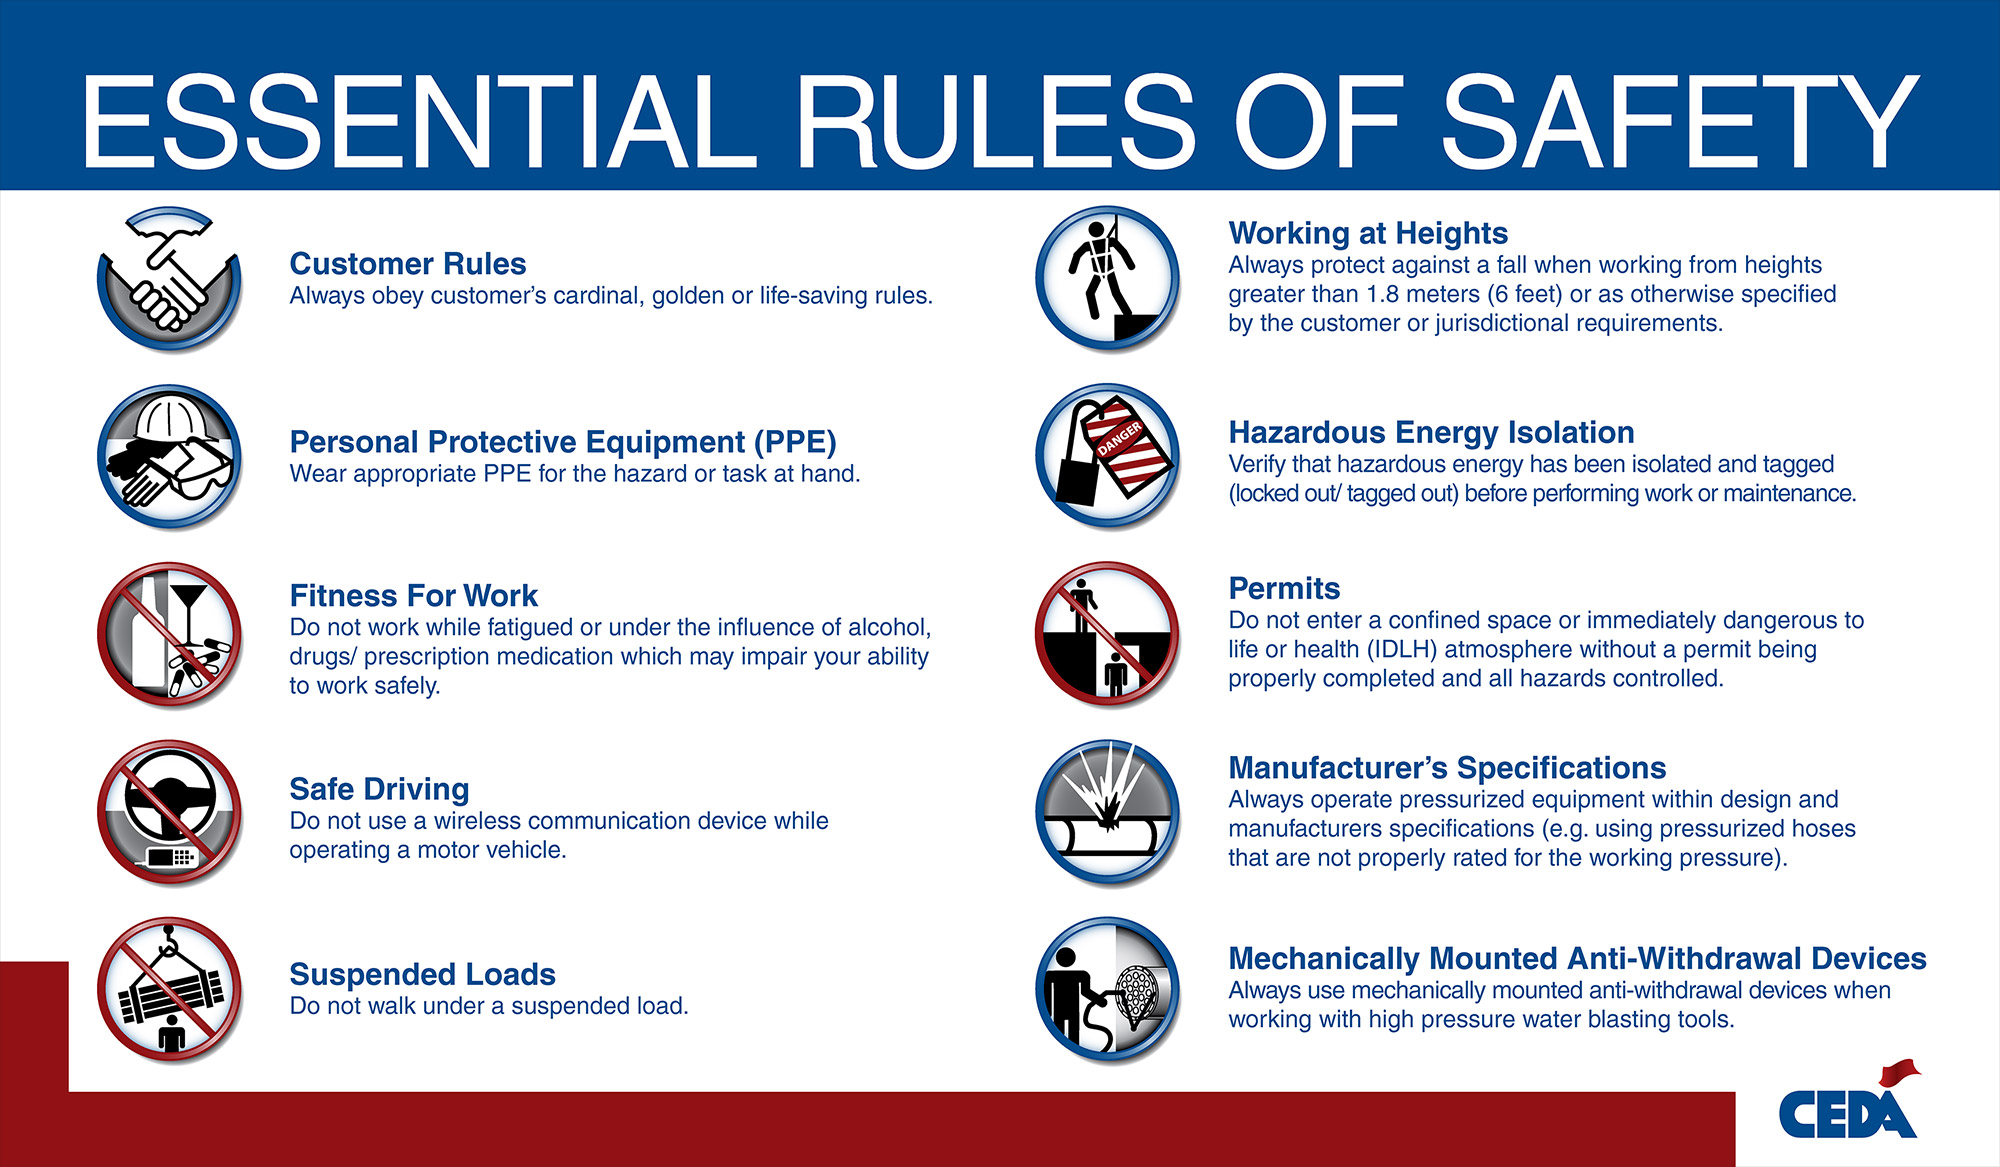 User rules. Safety Rules. Safety Rules in the workplace. Safety Rules at work. Essential Rules of Safety.